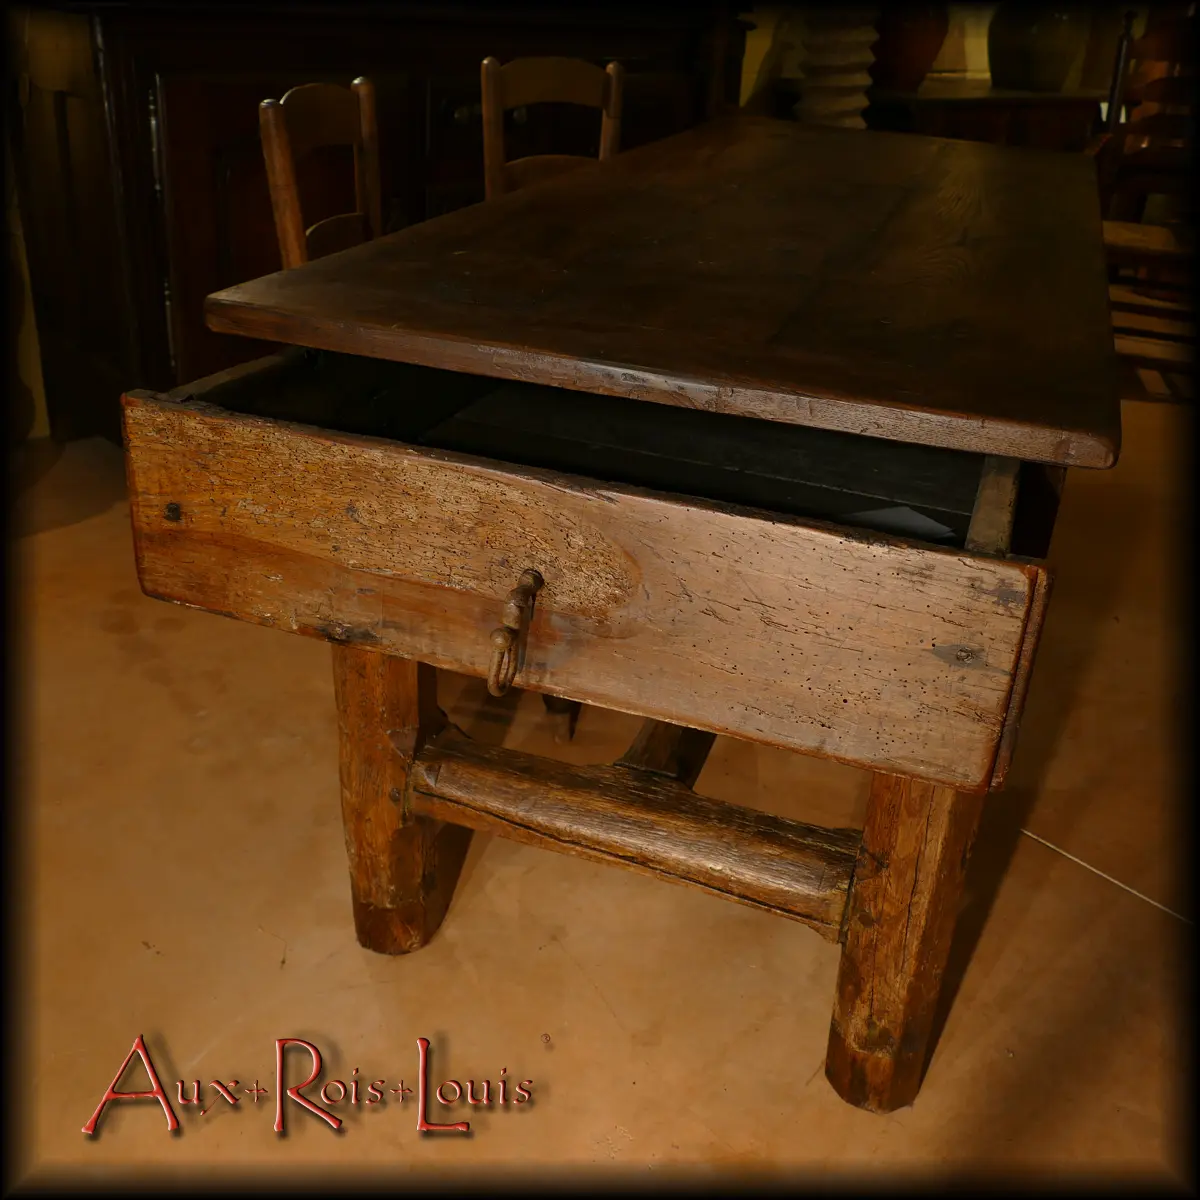 The large drawer of this Auvergne oak table housed the loaves of bread, baked in the bread oven for the whole week.